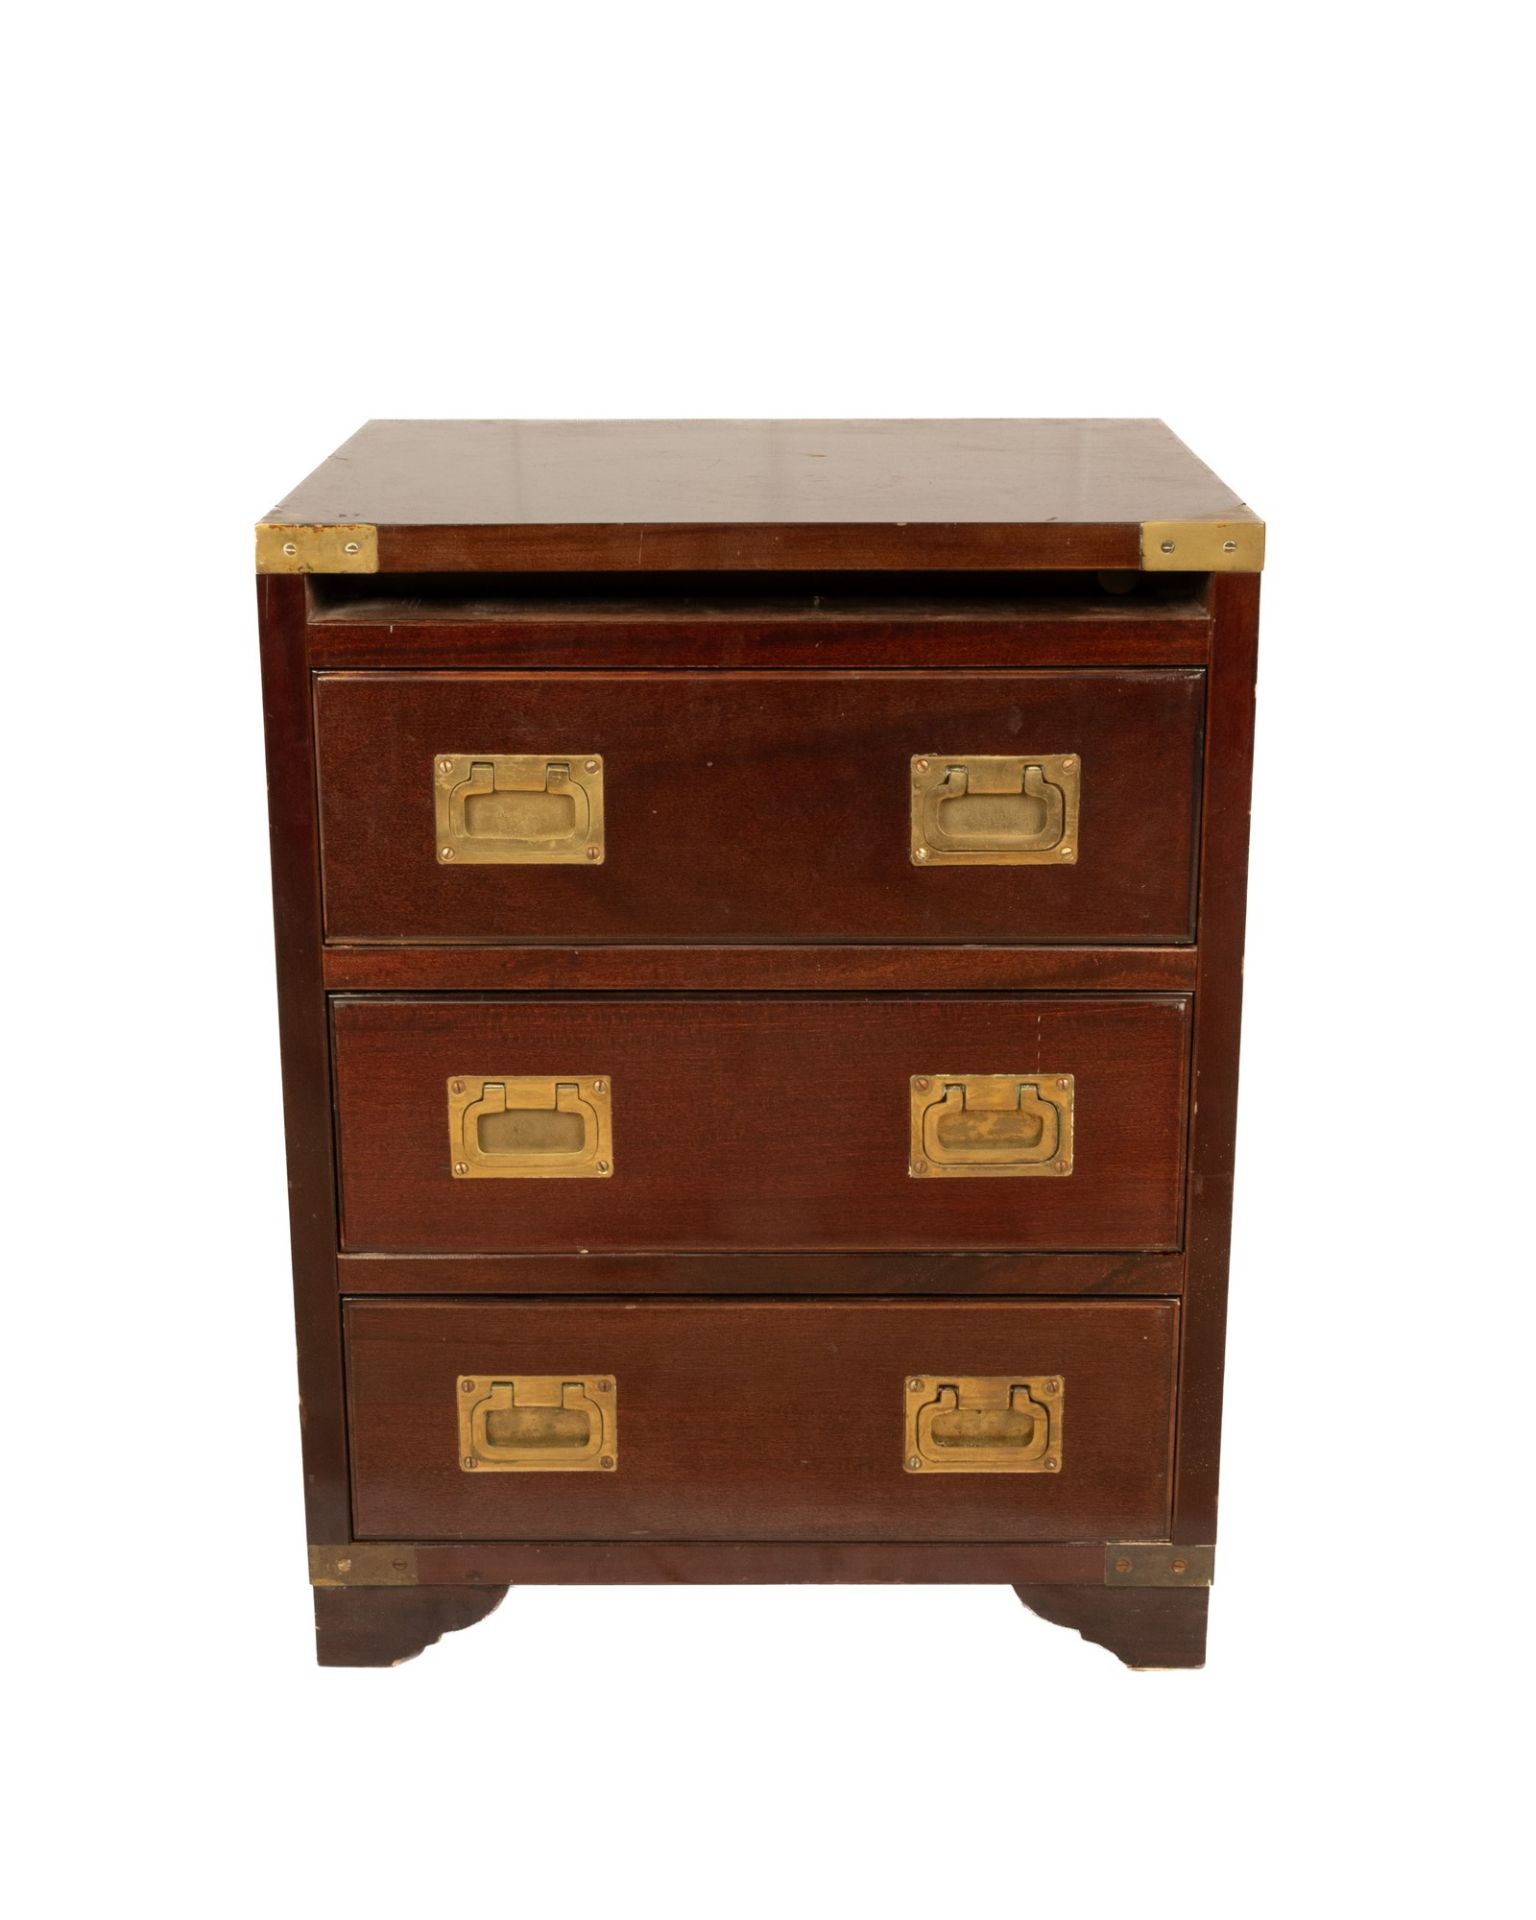 Antica Marina wooden bedside table with brass inserts - Image 12 of 23